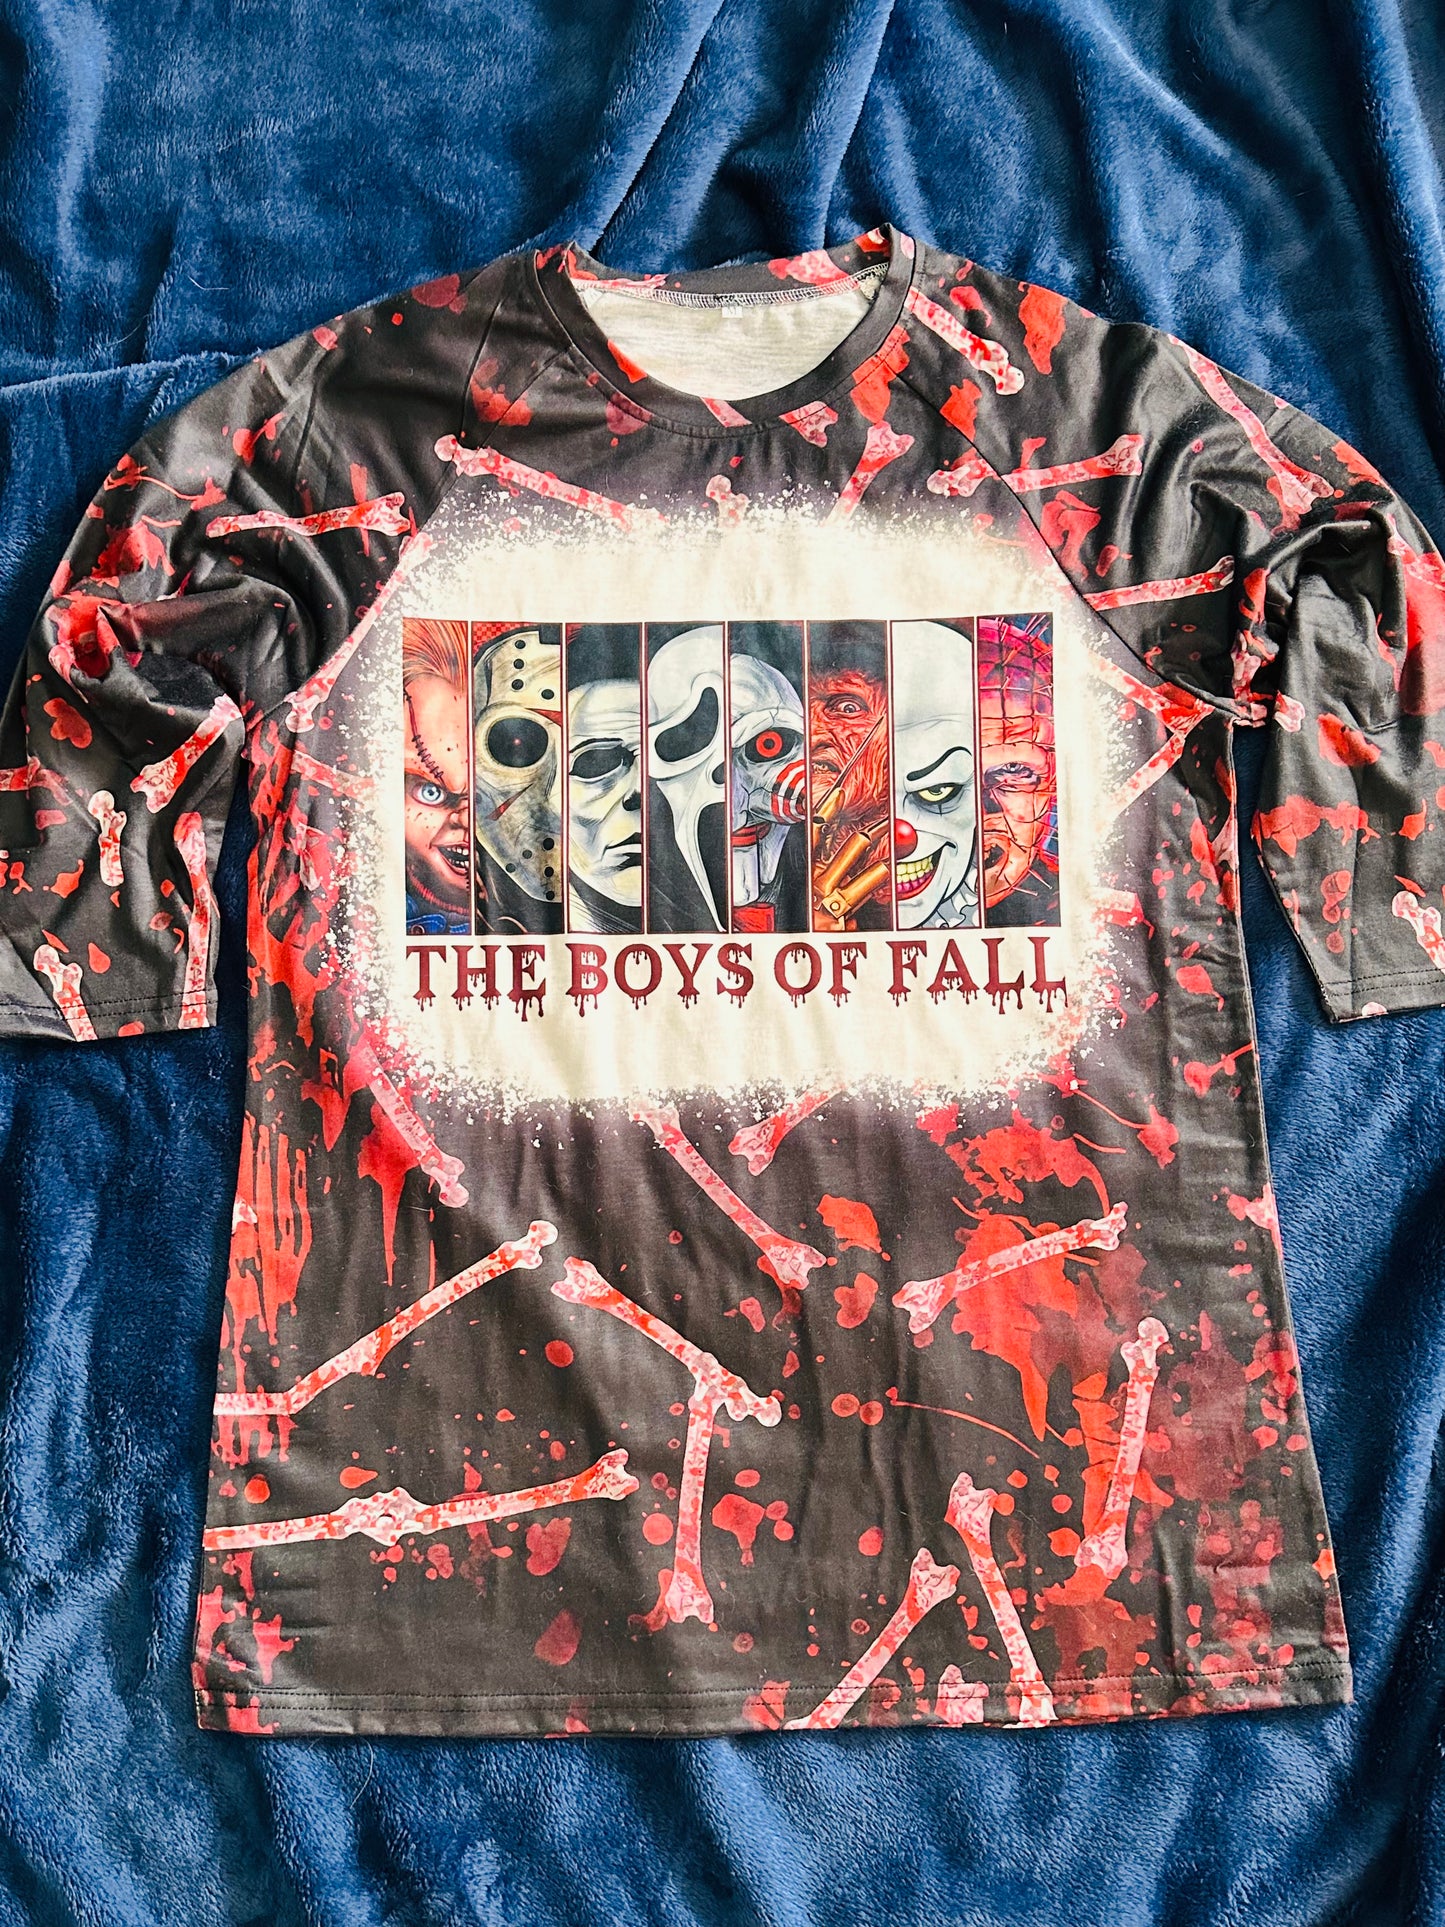 The Boys of Fall